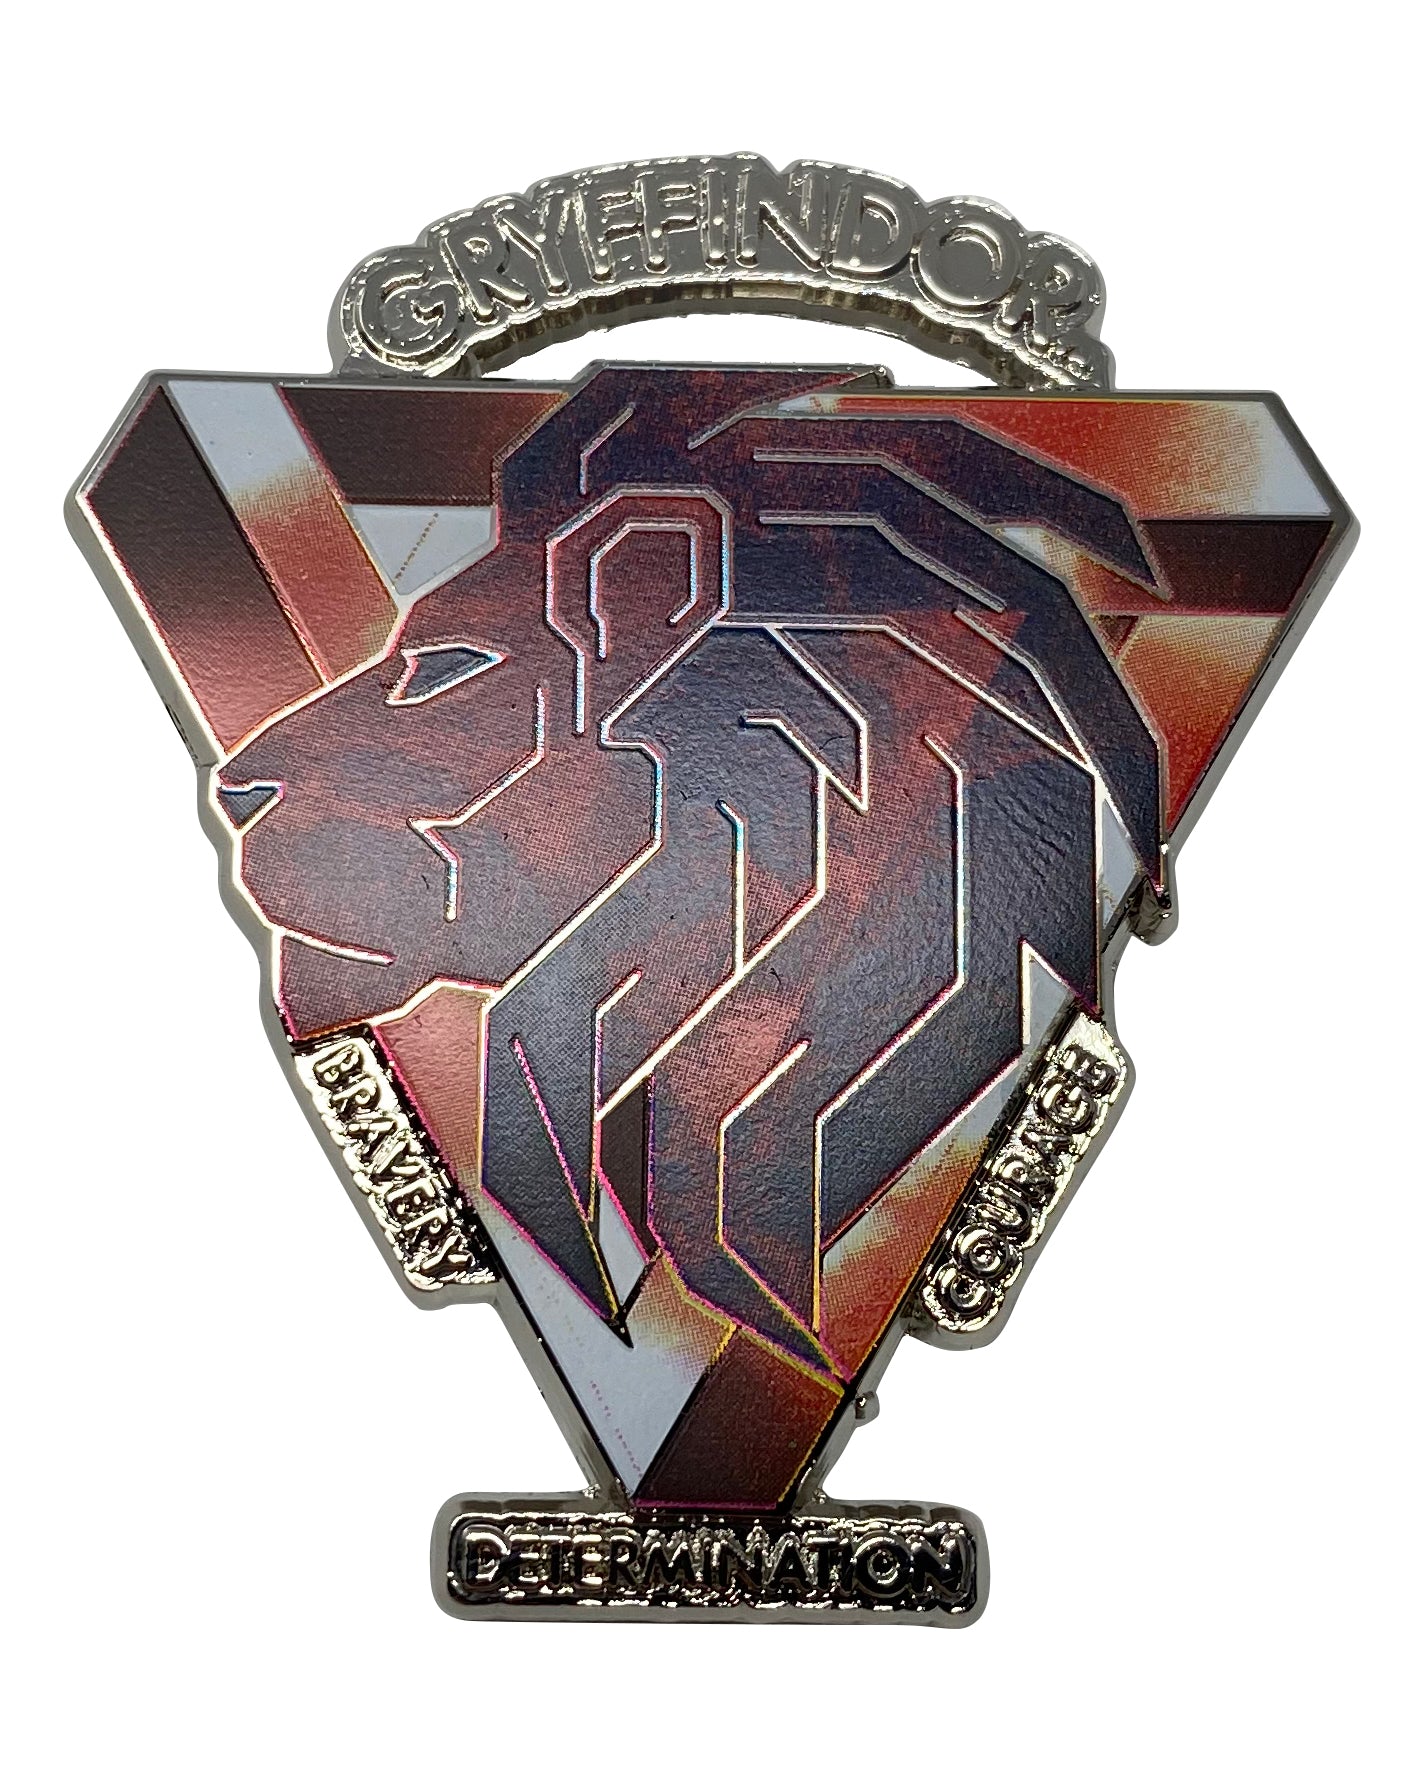 Harry Potter Limited Edition Gryffindor House Pin Badge